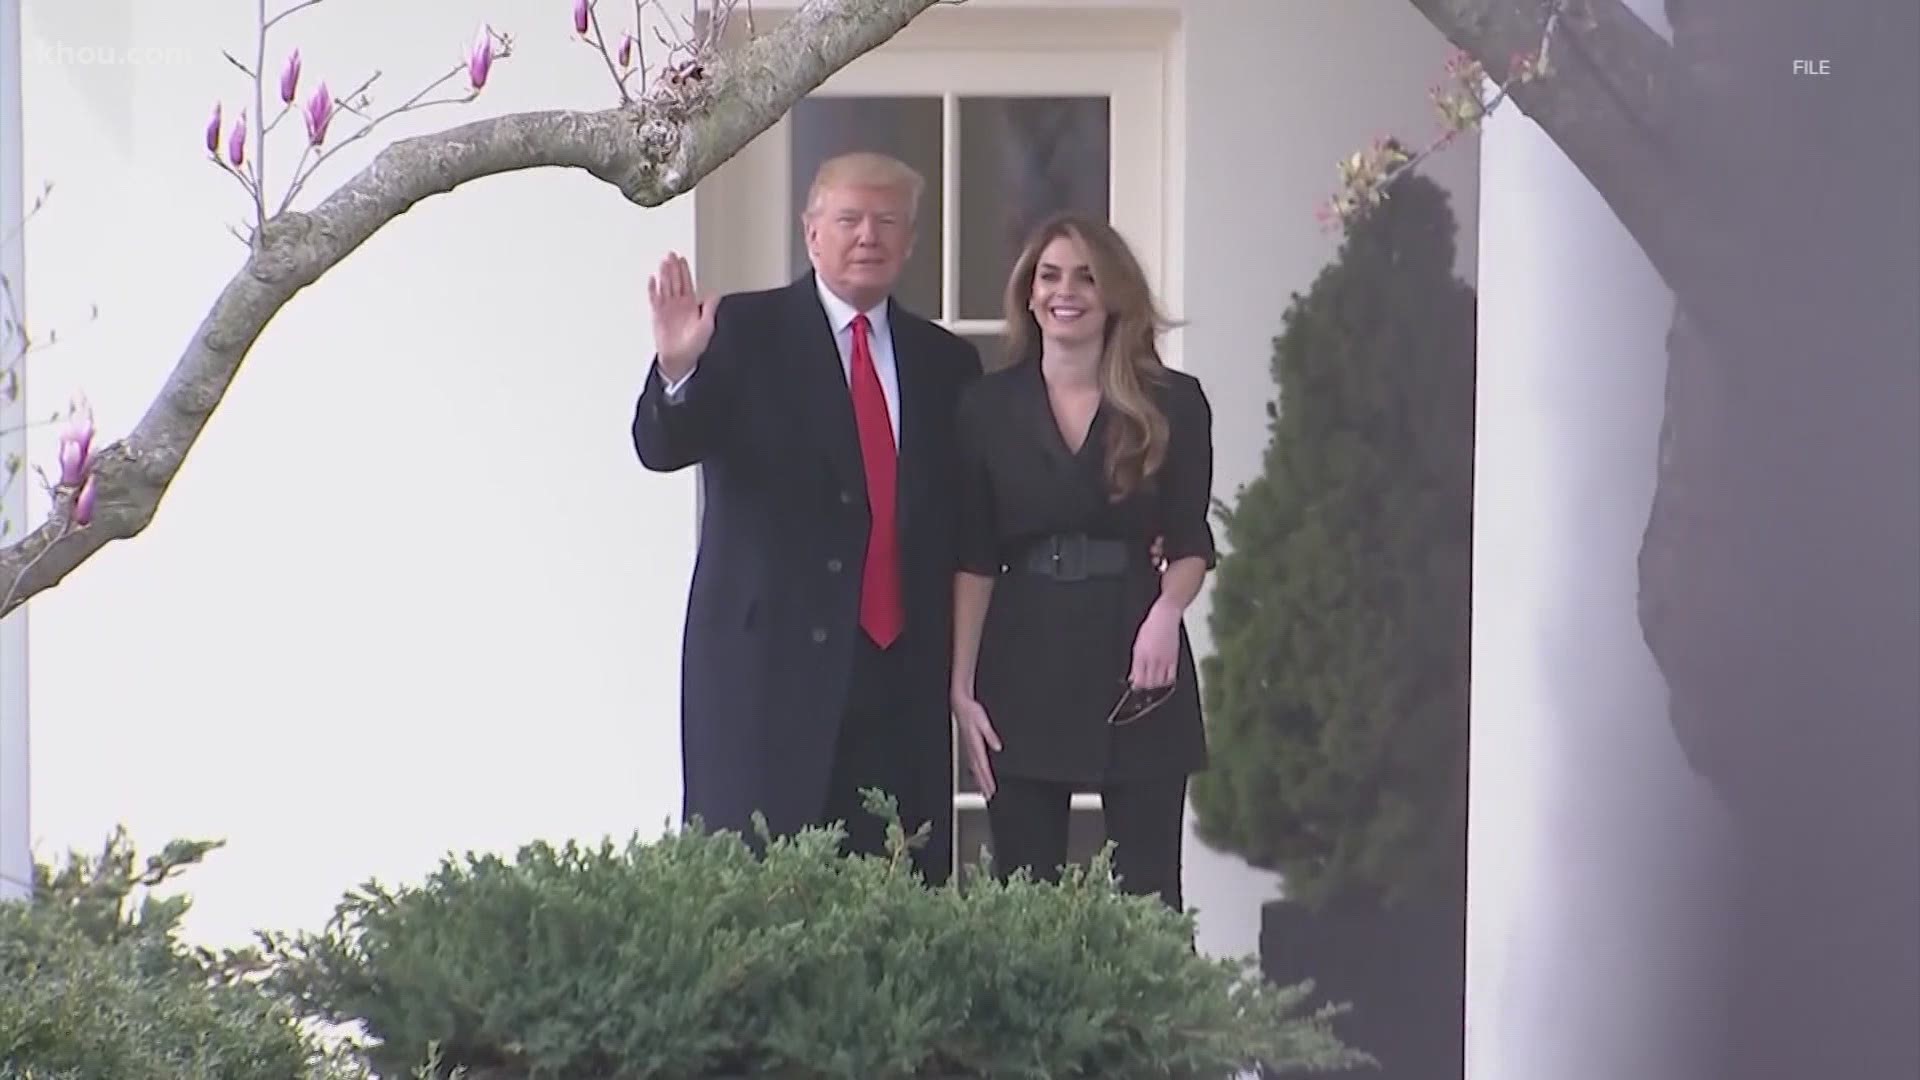 The White House is left with a lot of contract tracing to do. This after aid Hope Hicks, President Donald Trump and the first lady all tested positive for COVID-19.